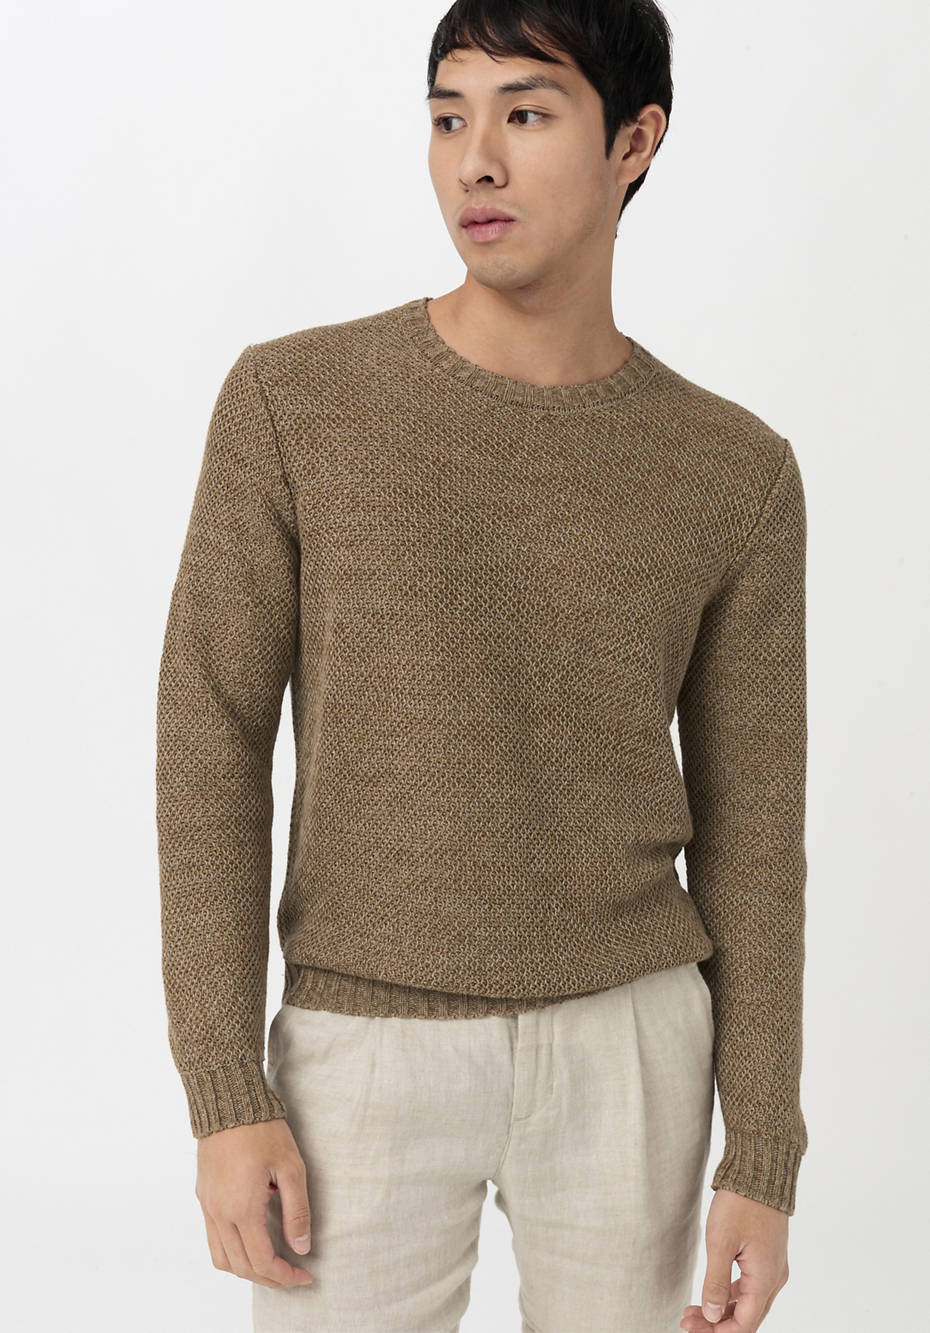 Sweater made from pure organic linen